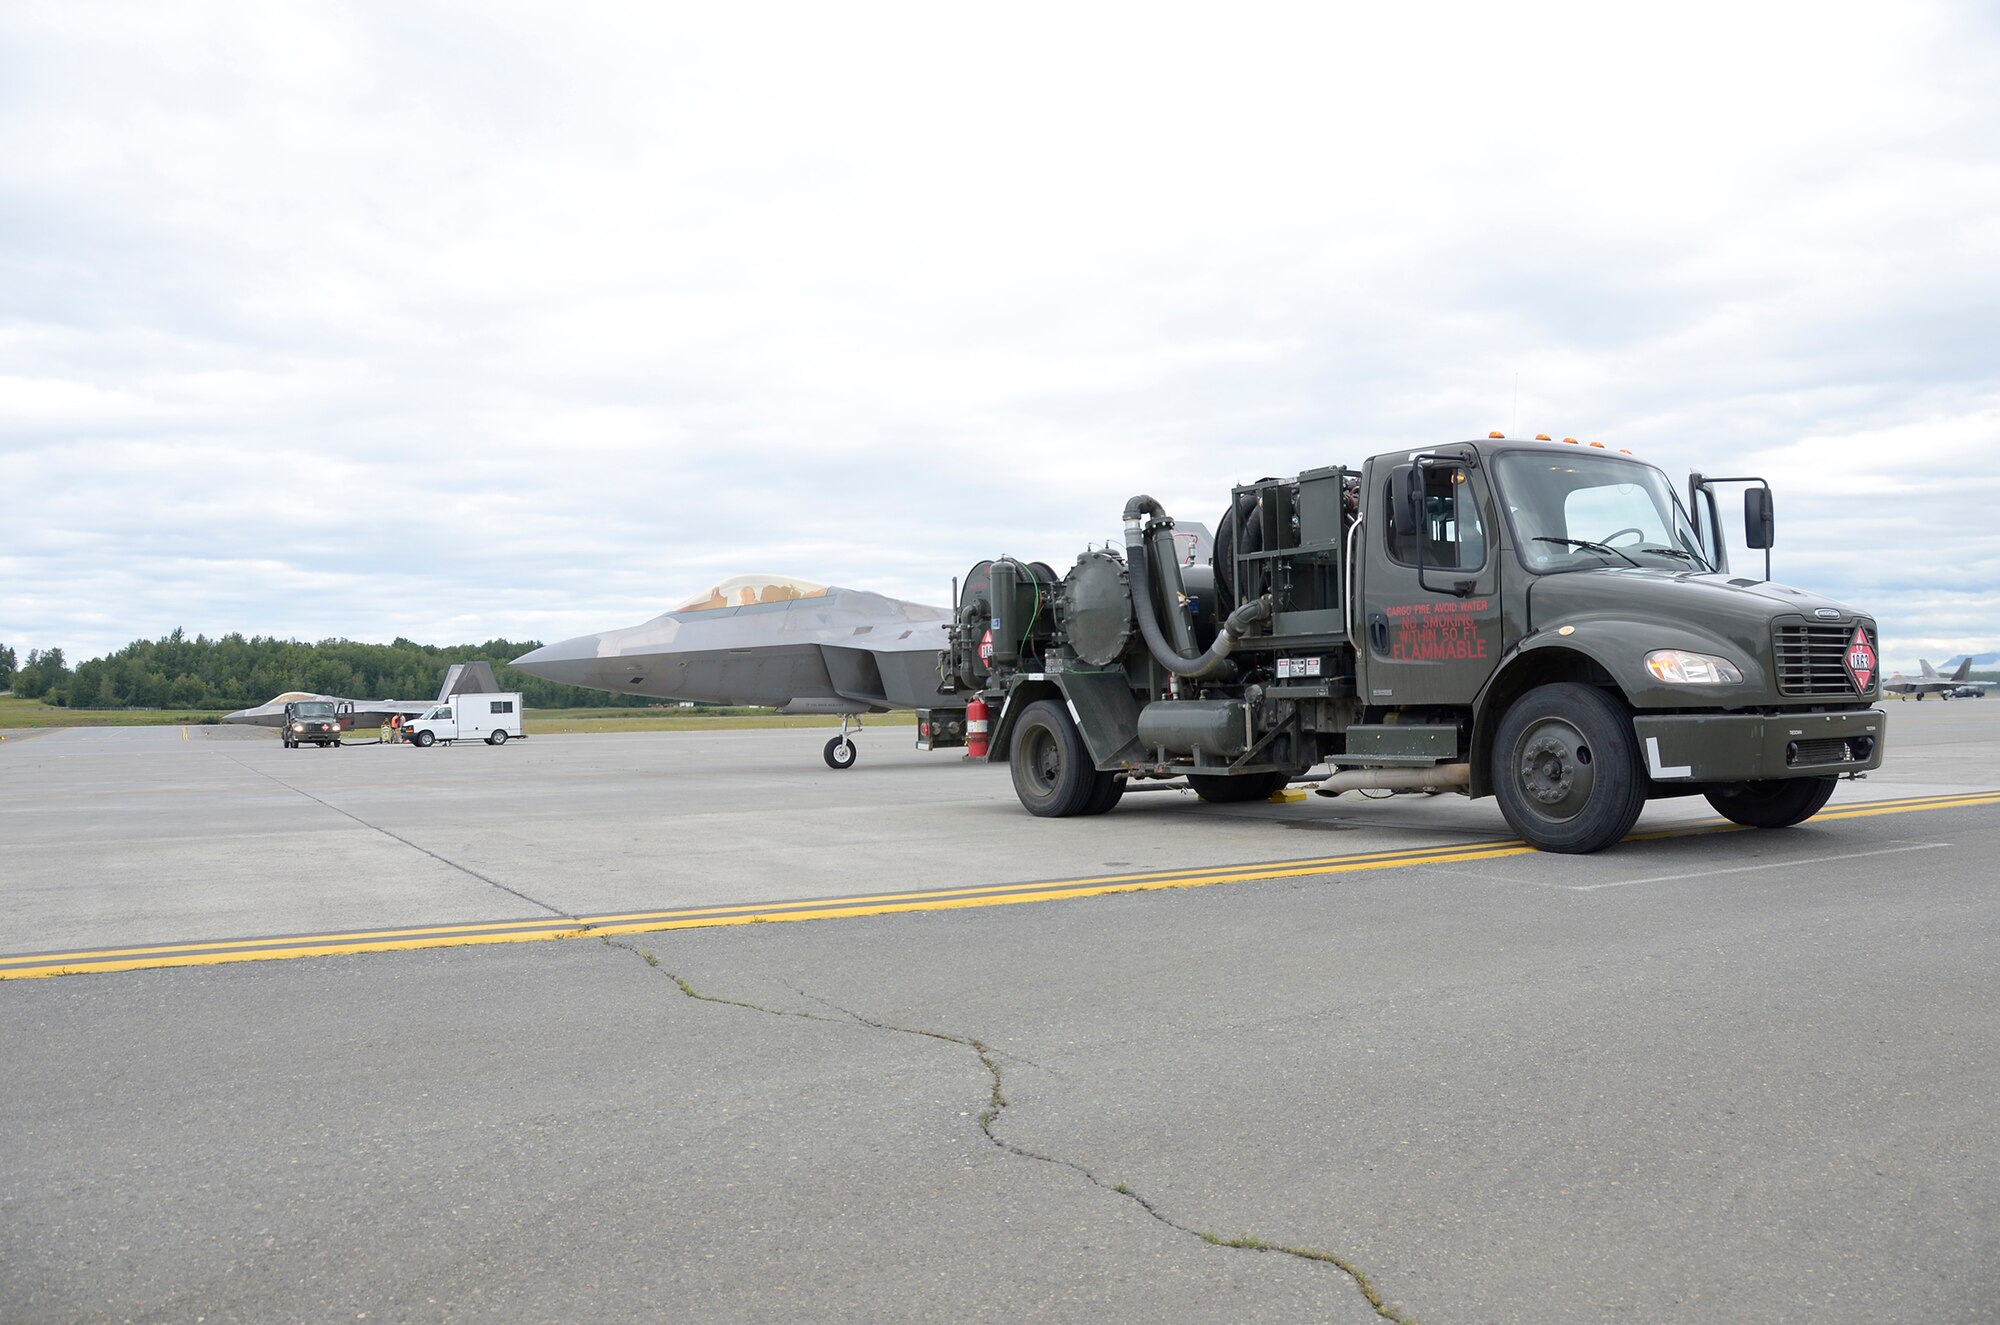 A fuel truck from the 673rd Logistics Readiness Squadron here sits in front of an F-22 Raptor July 27, 2016, at JBER. The 445th LRS from Wright-Patterson Air Force Base, Ohio attended annual training at JBER and were able to get hands on training with the F-22s. (U.S. Air Force photo/Staff Sgt. Joel McCullough)